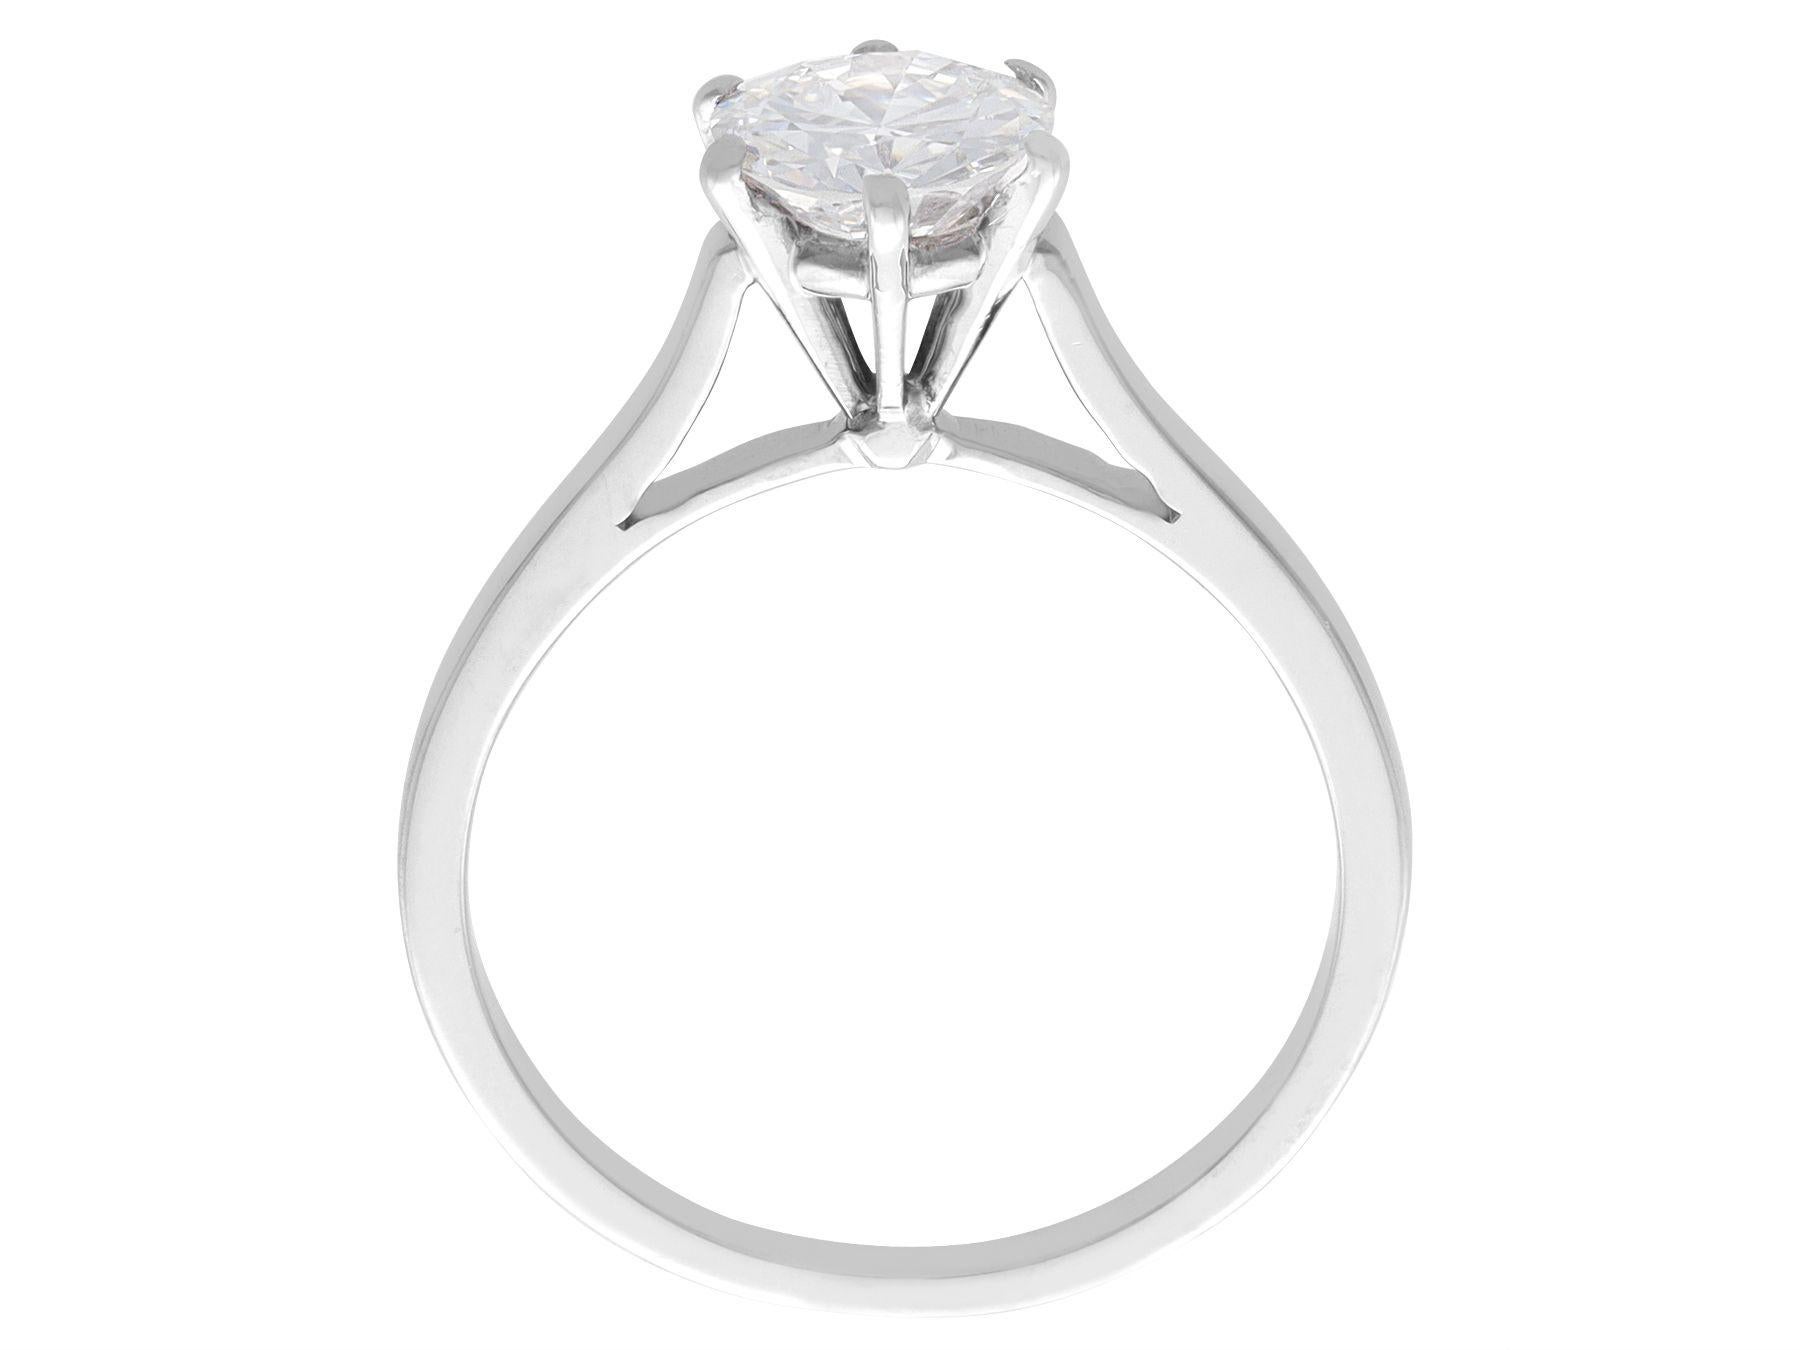 Women's or Men's Vintage French 1.13 Carat Diamond Solitaire Engagement Ring in White Gold For Sale